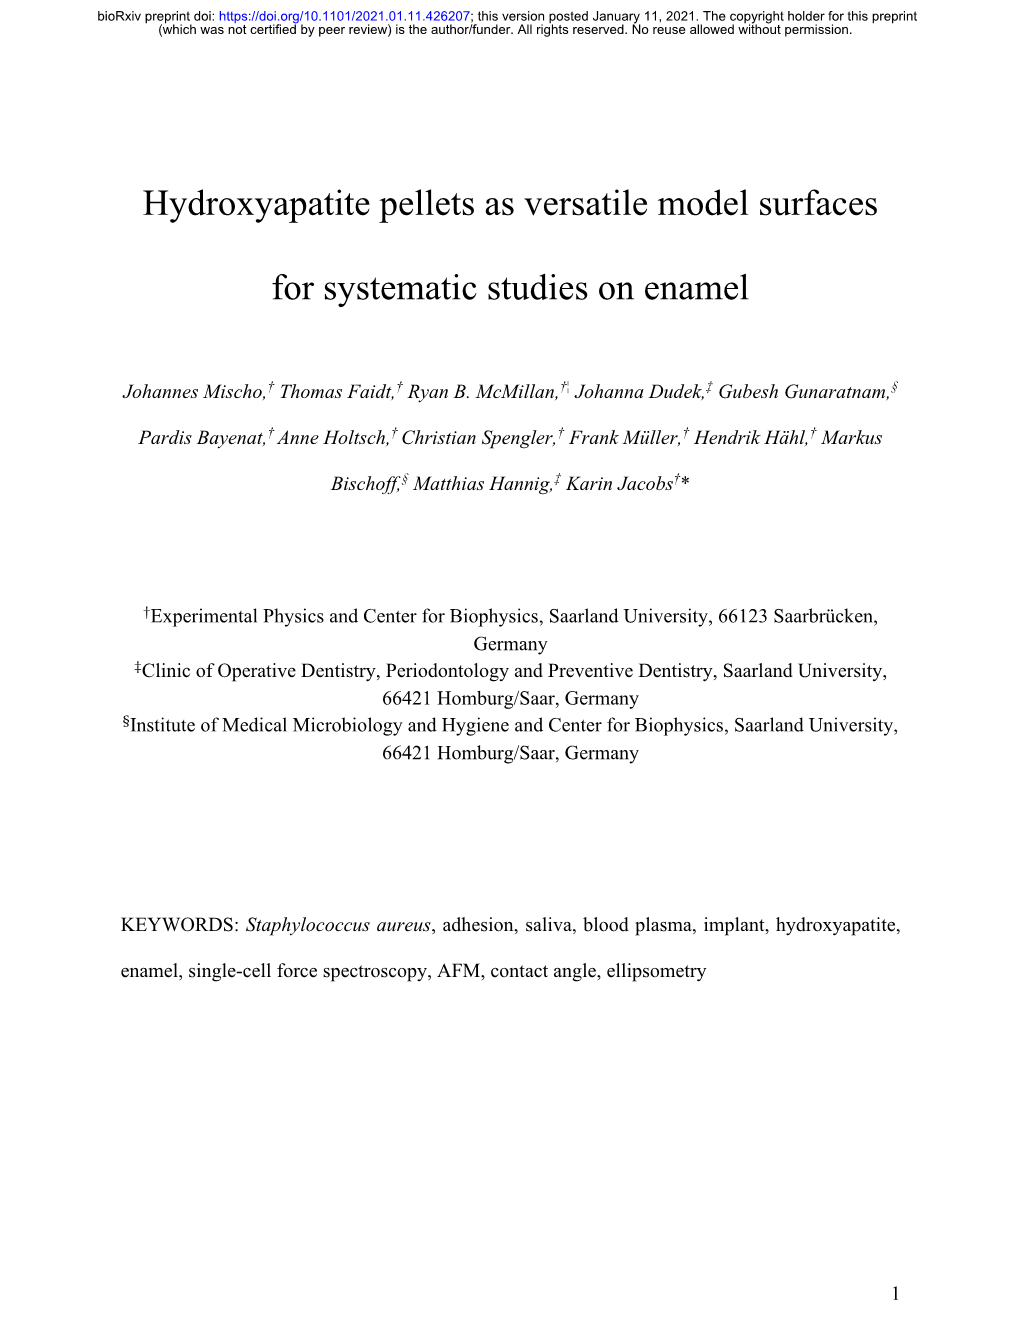 Hydroxyapatite Pellets As Versatile Model Surfaces for Systematic